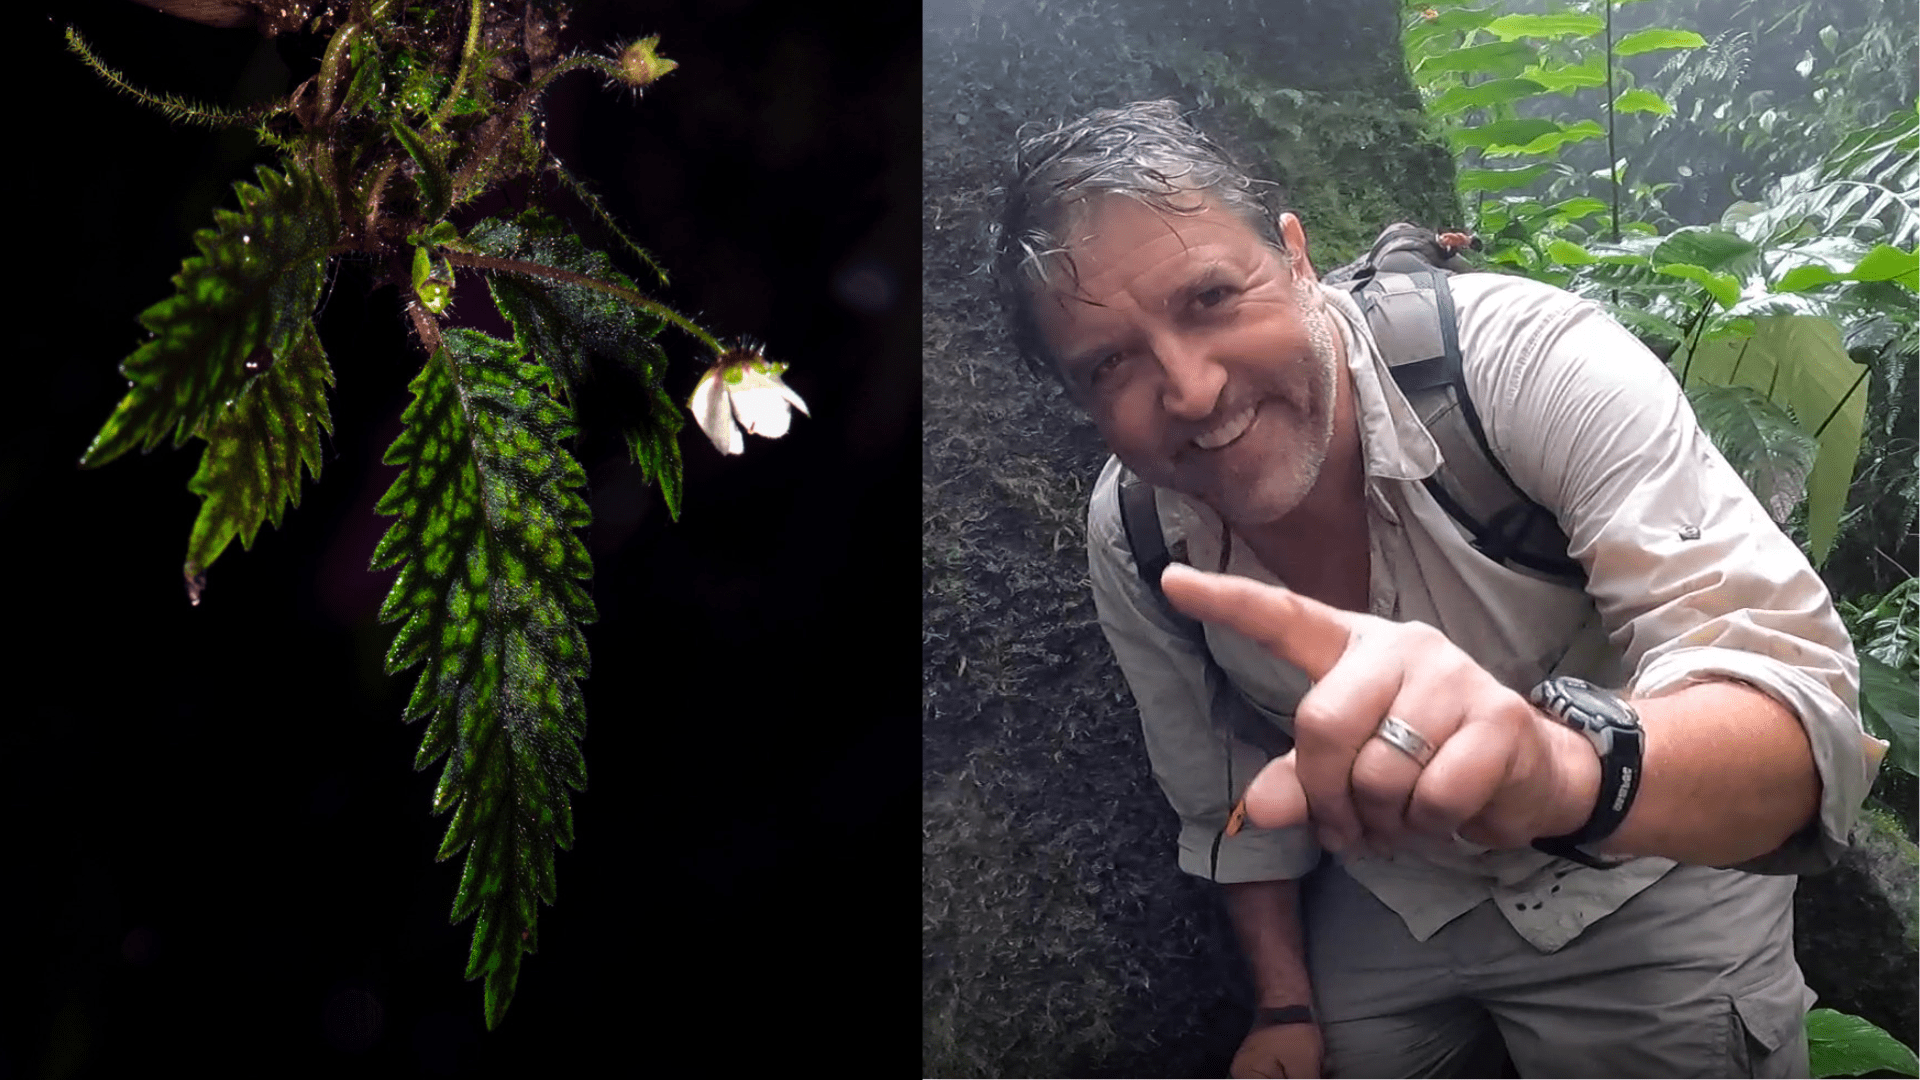 ¡Que Vive Centinela! A tiny new plant species reaffirms the “miraculous” survival of Western Ecuador’s ravished biodiversity